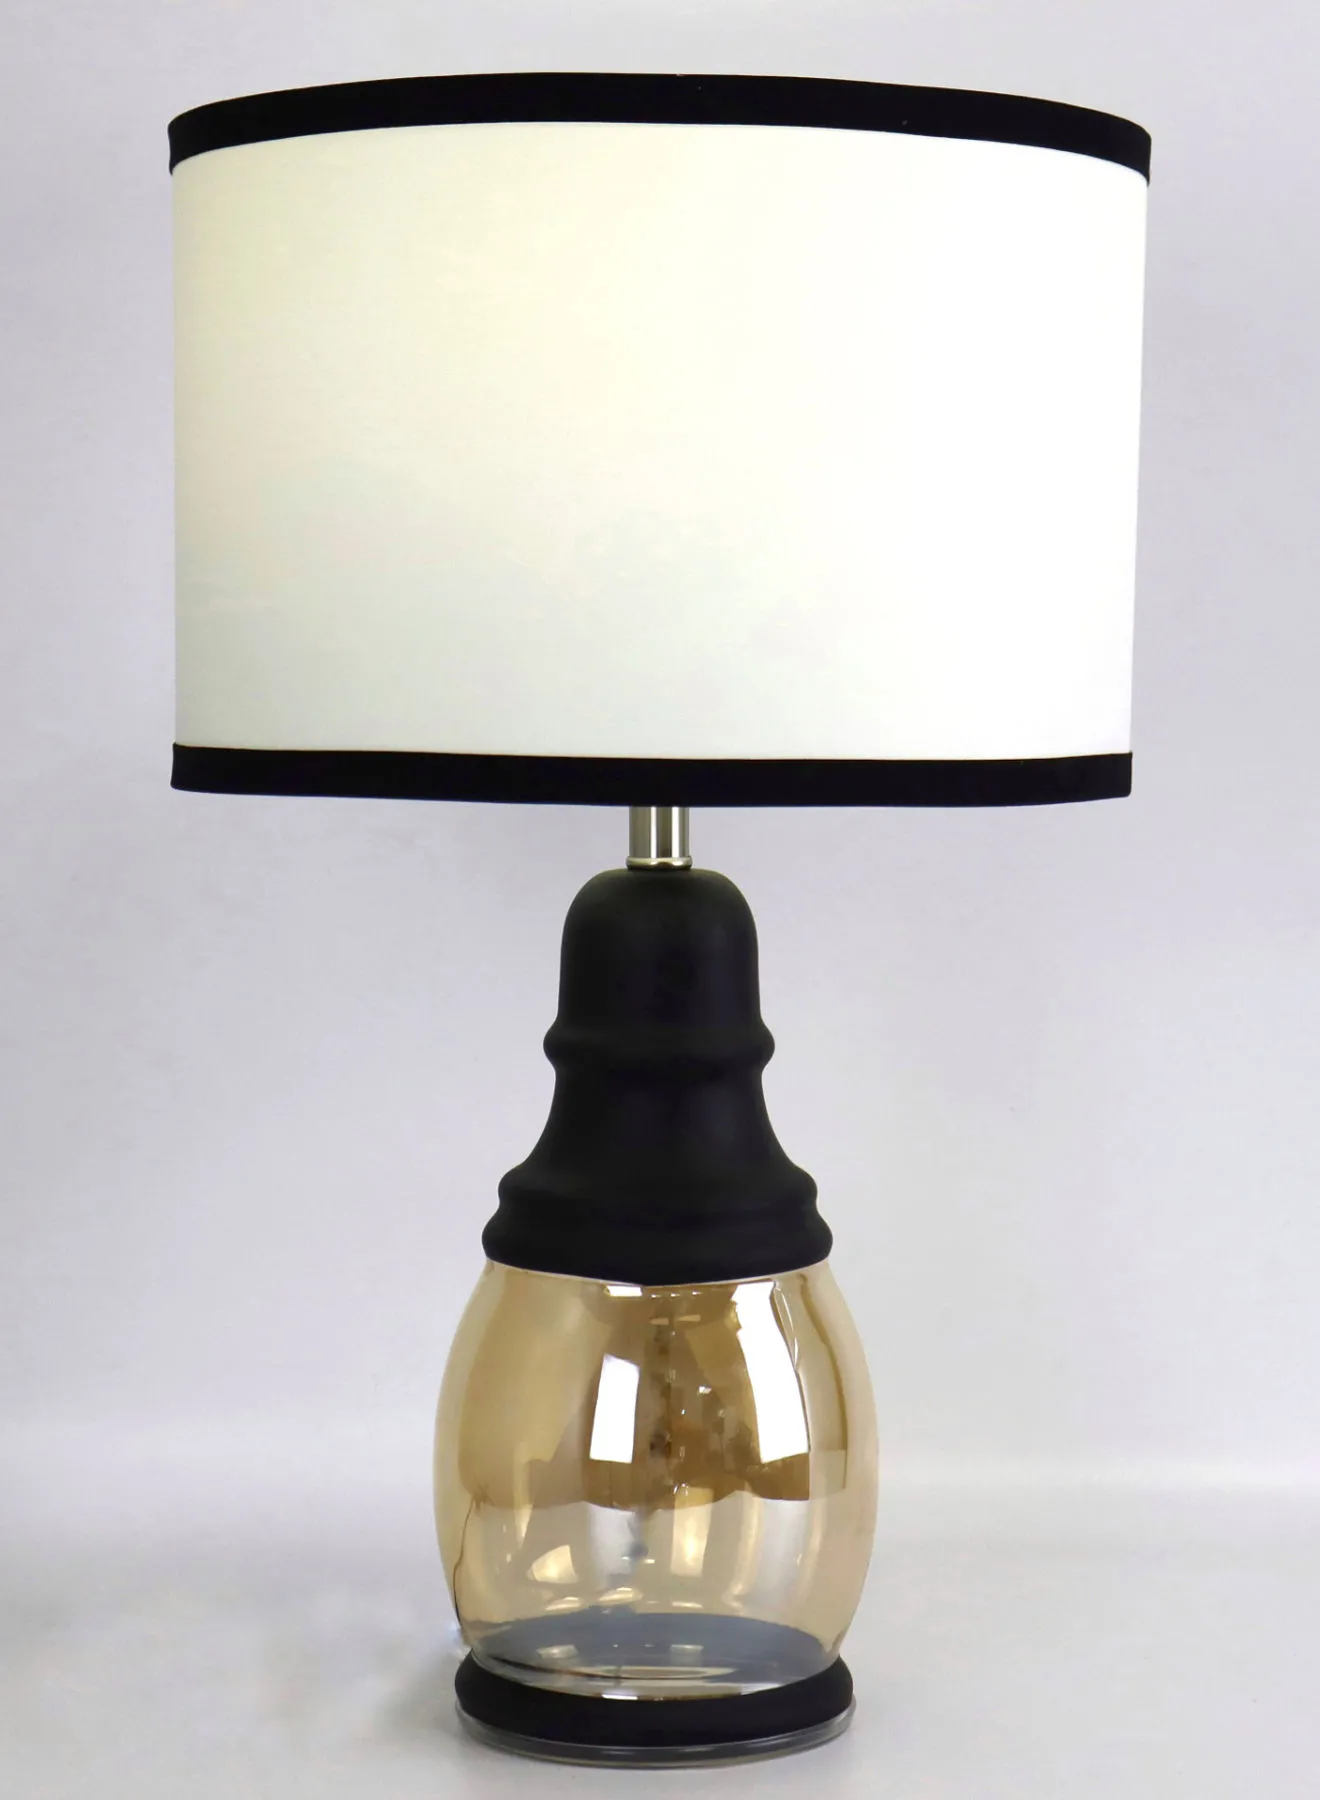 Switch Modern Design Glass Table Lamp Unique Luxury Quality Material for the Perfect Stylish Home RSN71051 Gold/Black 11.8 x 20 Gold/Black 11.8 x 20inch